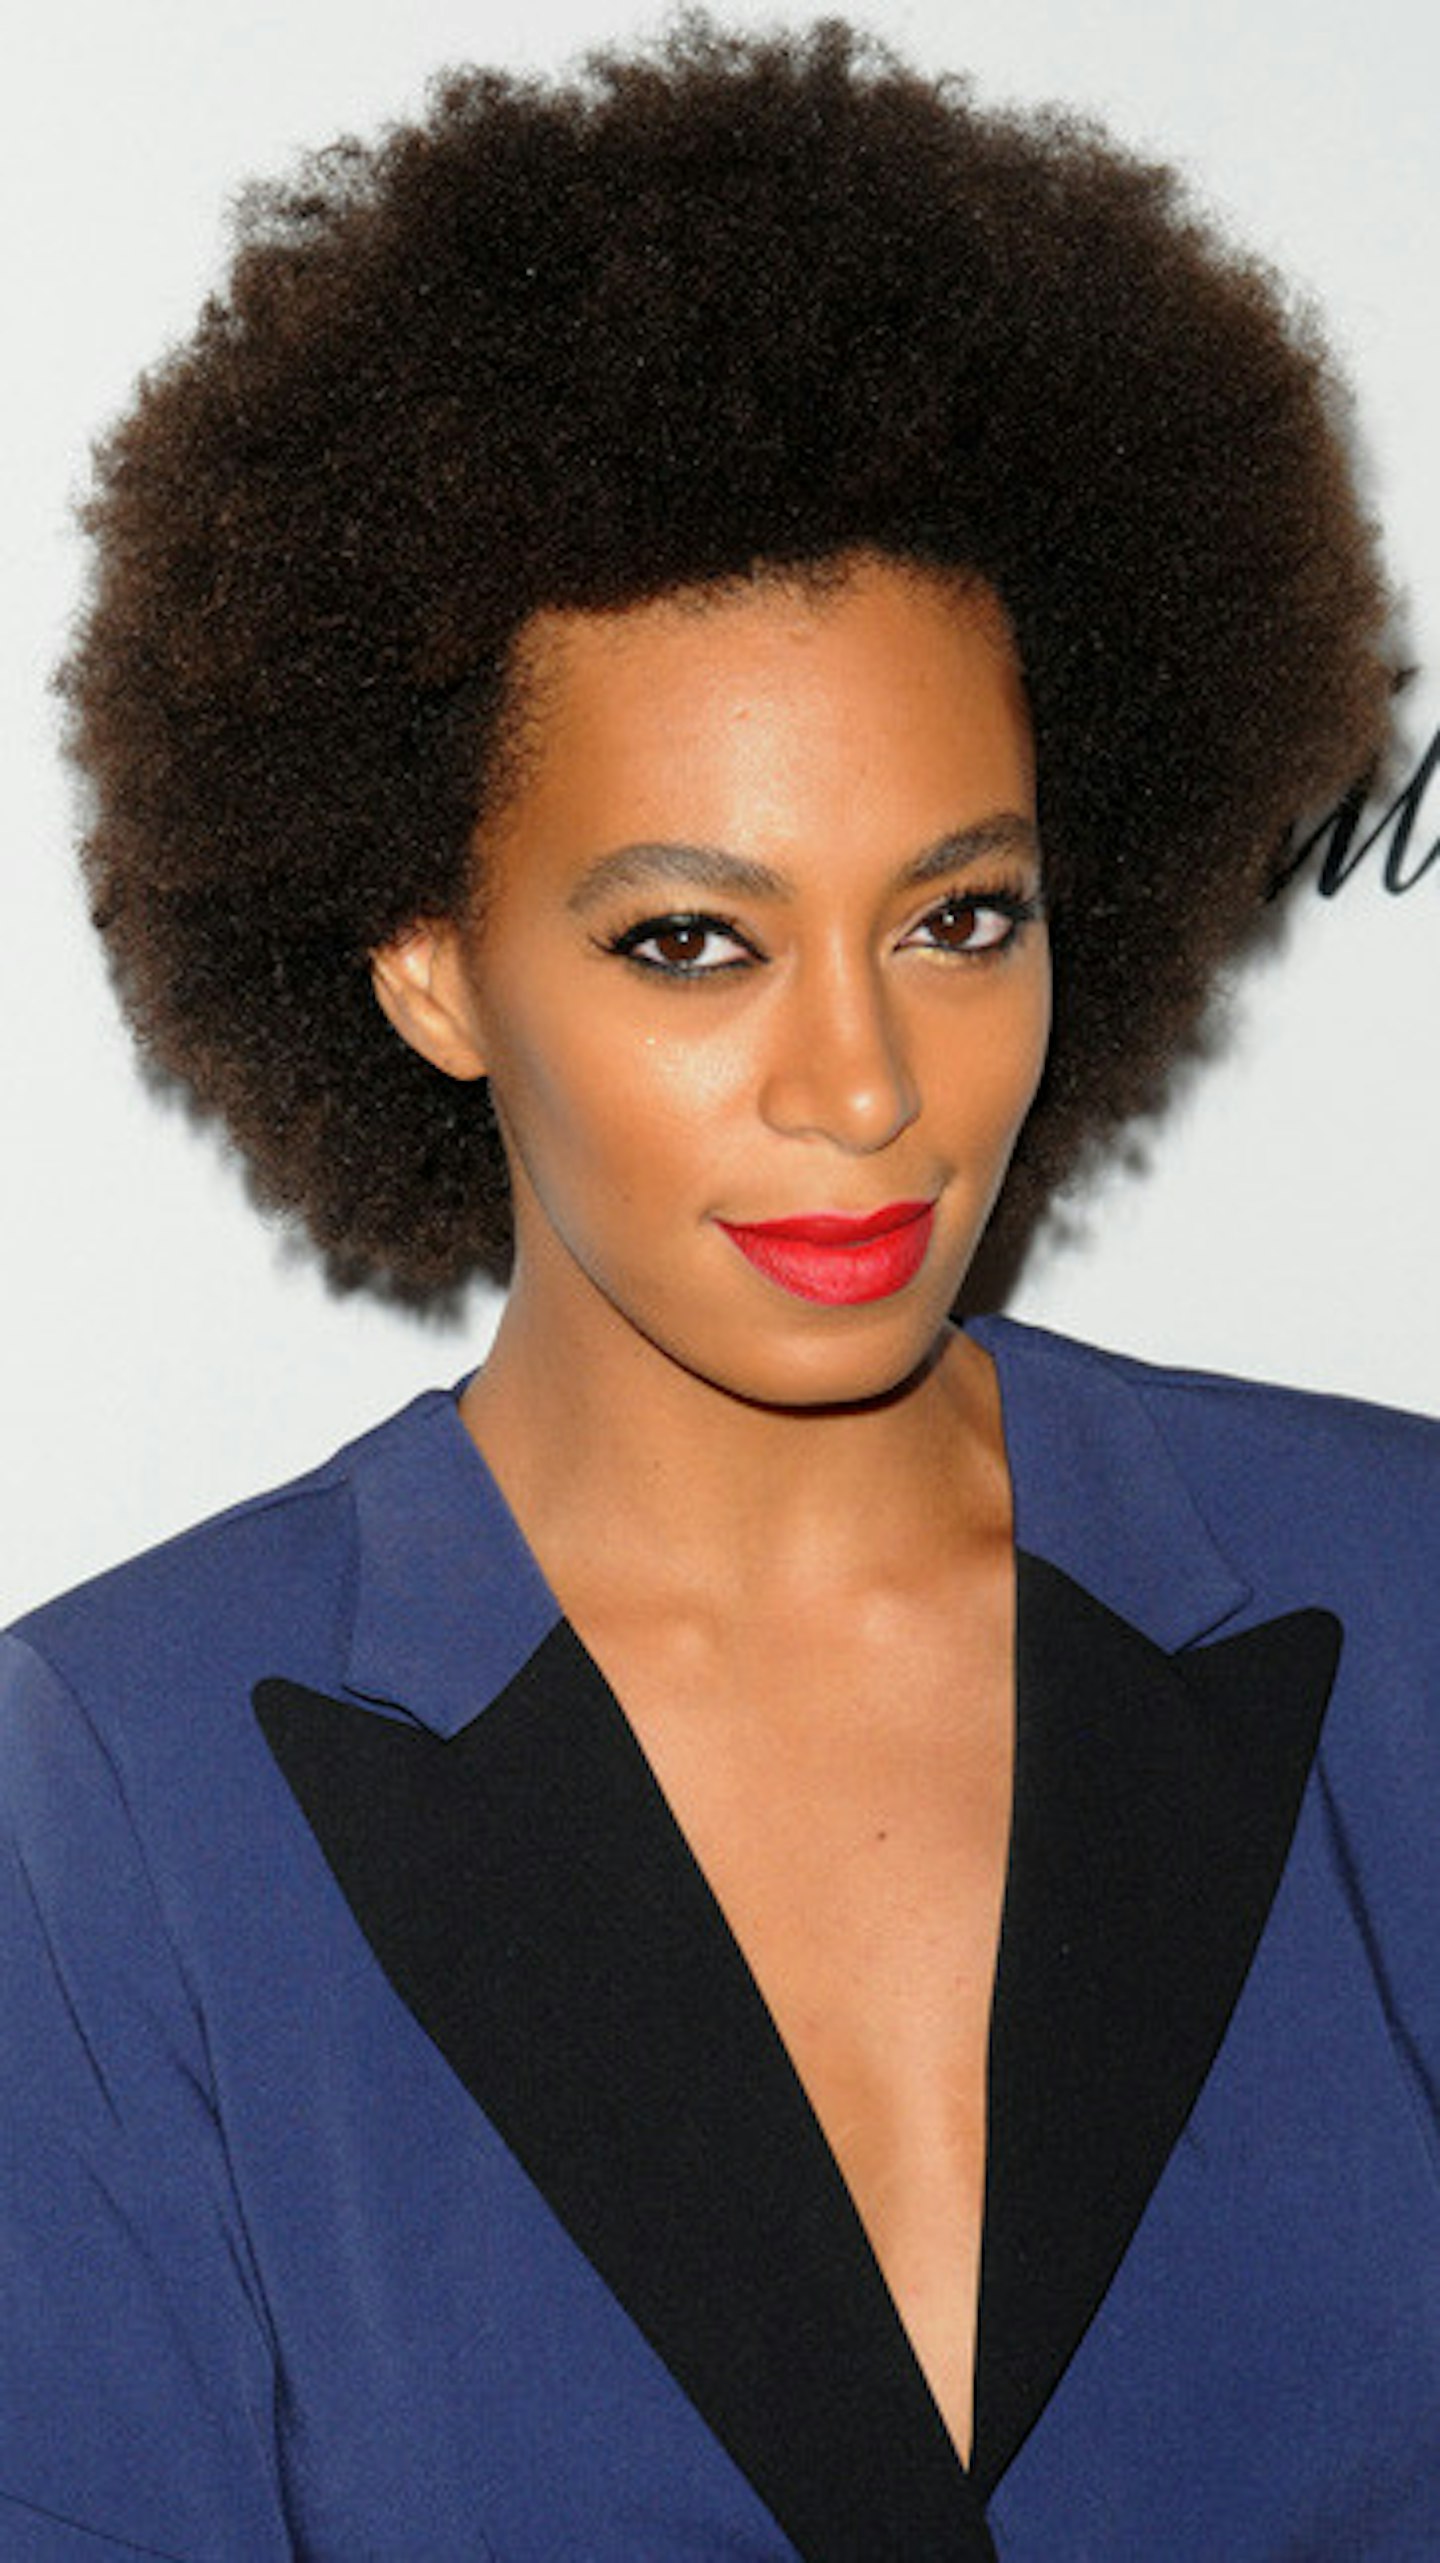 Beyonce's sister Solange Knowles was shown attacking Jay Z in a lift